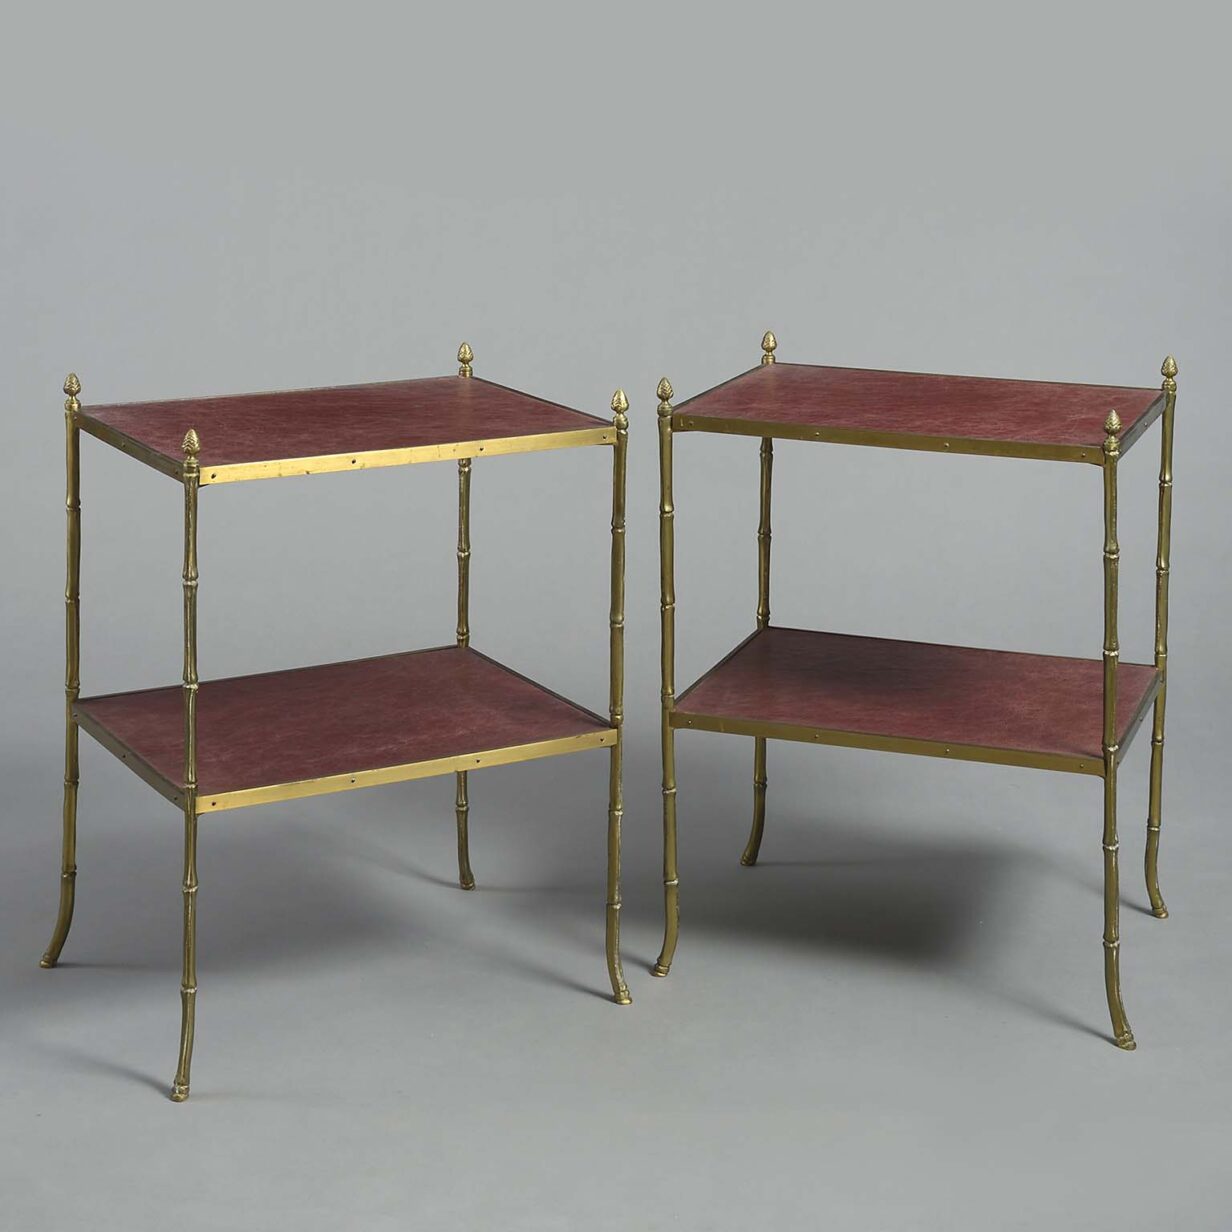 Pair of two tier brass and leathered end tables